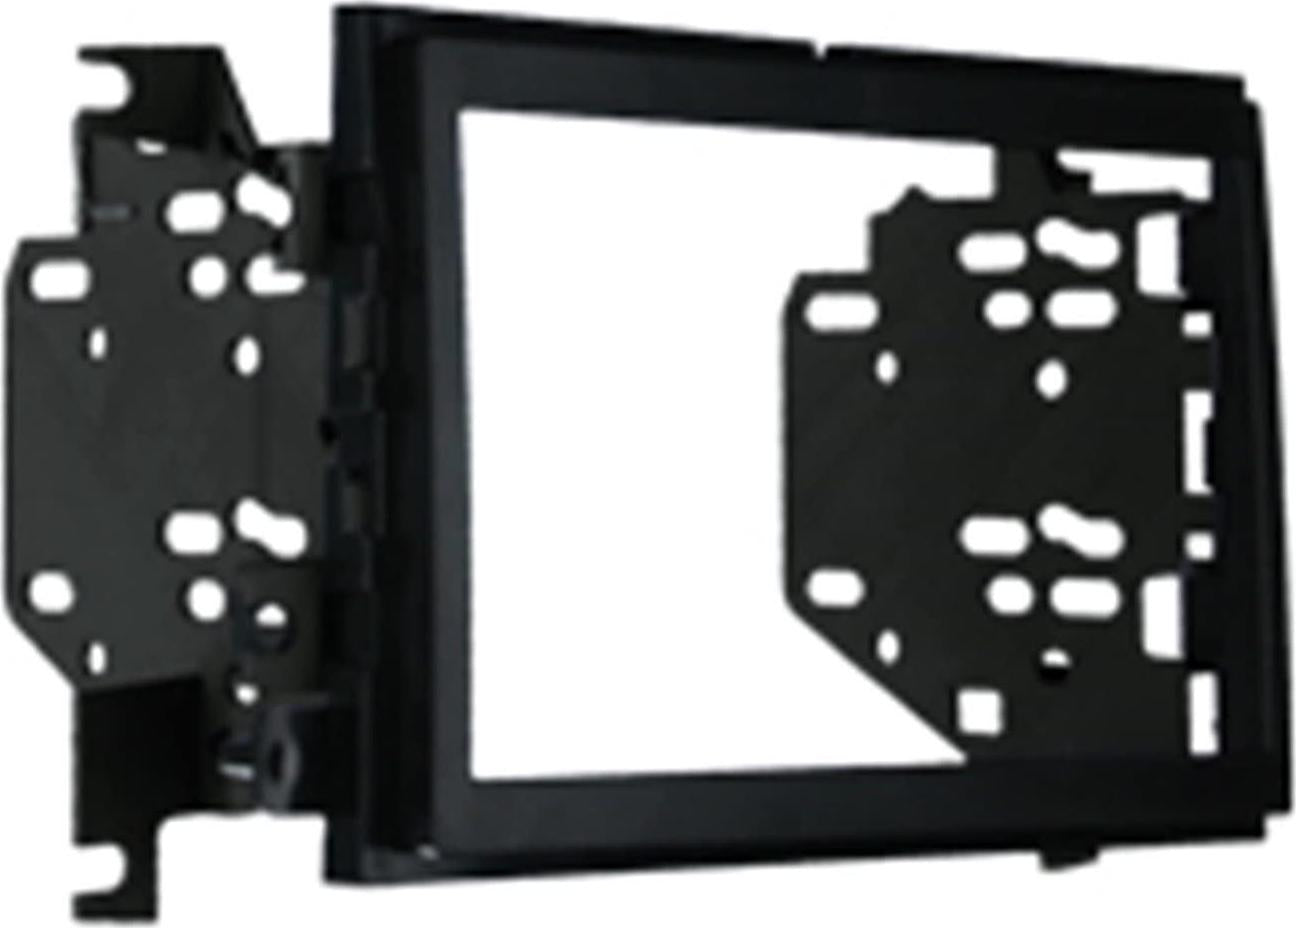 Metra Electronics, Metra 95-5822B Double DIN Installation Dash Kit for 2009-2010 Ford F-150 Non-NAV Models with Driver Info Switches in Factory Panel (Matte Black)